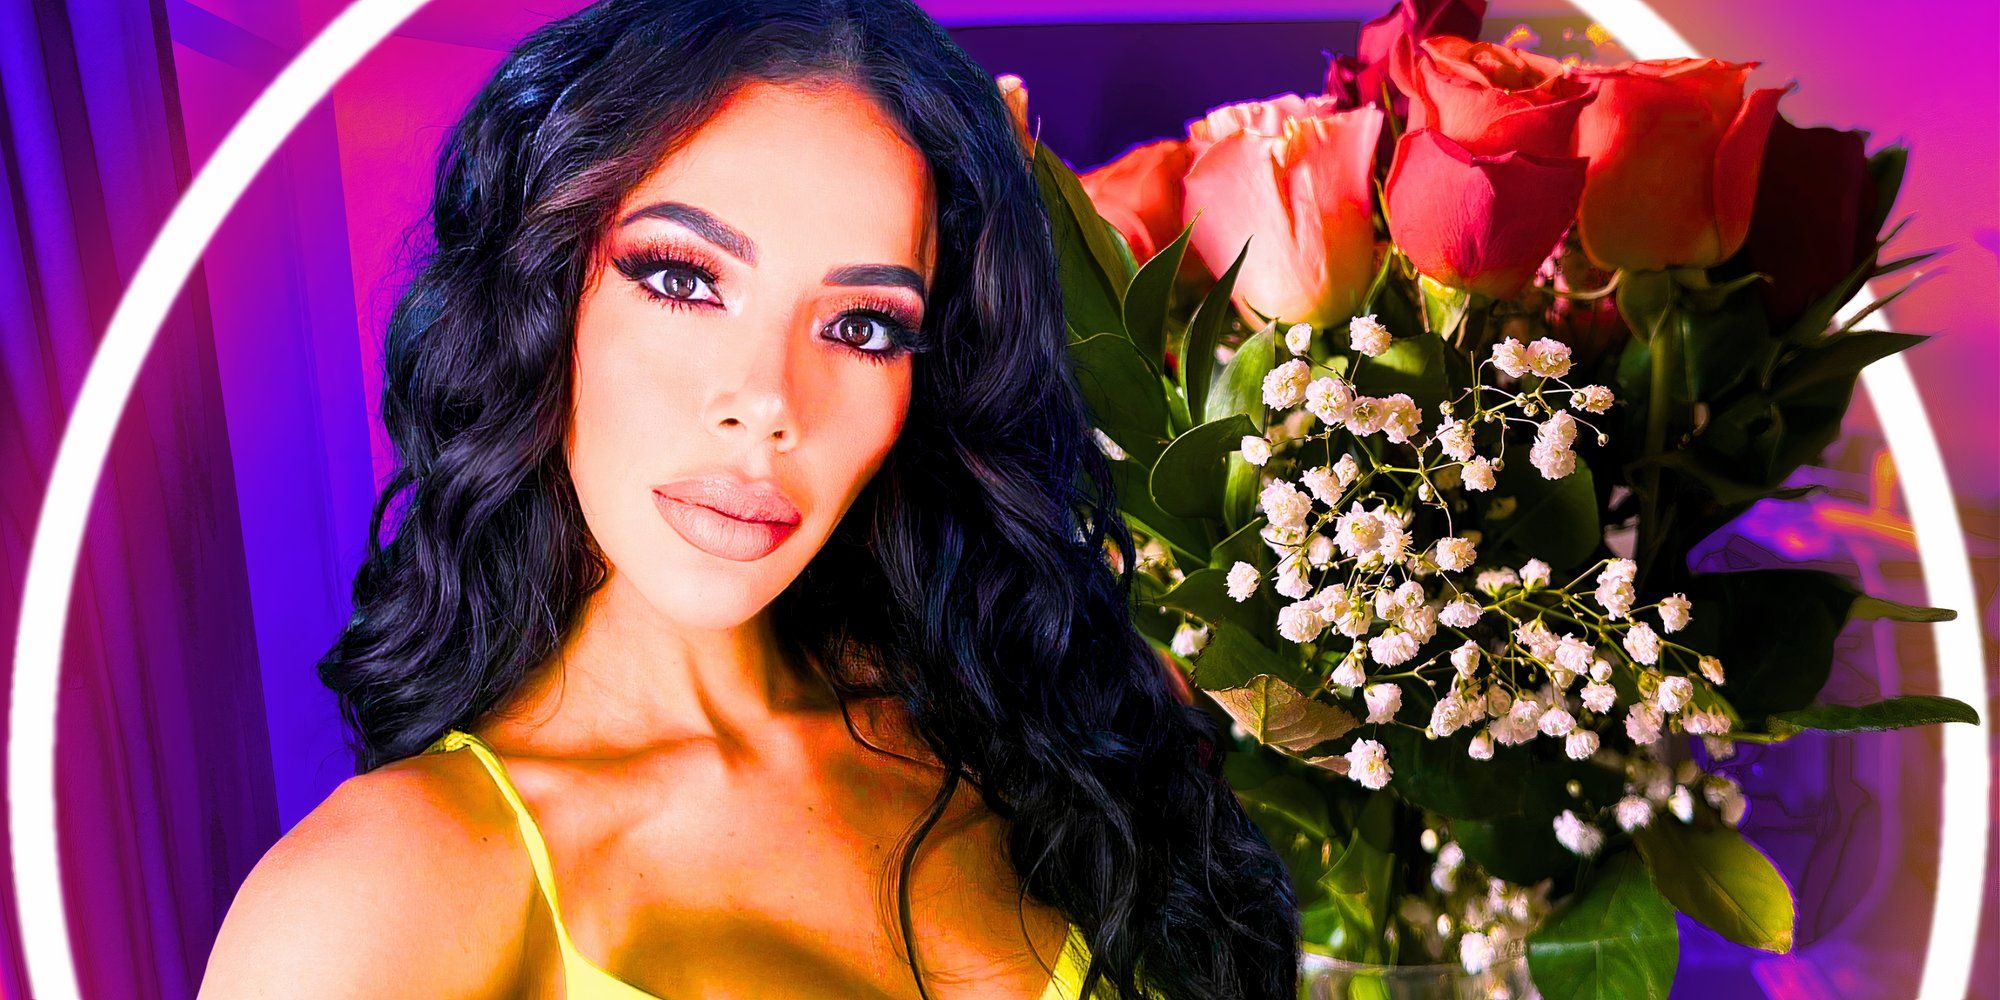 90 Day Fiancé’s Jasmine Pineda stares at the camera, with Mother's Day flowers next to her.